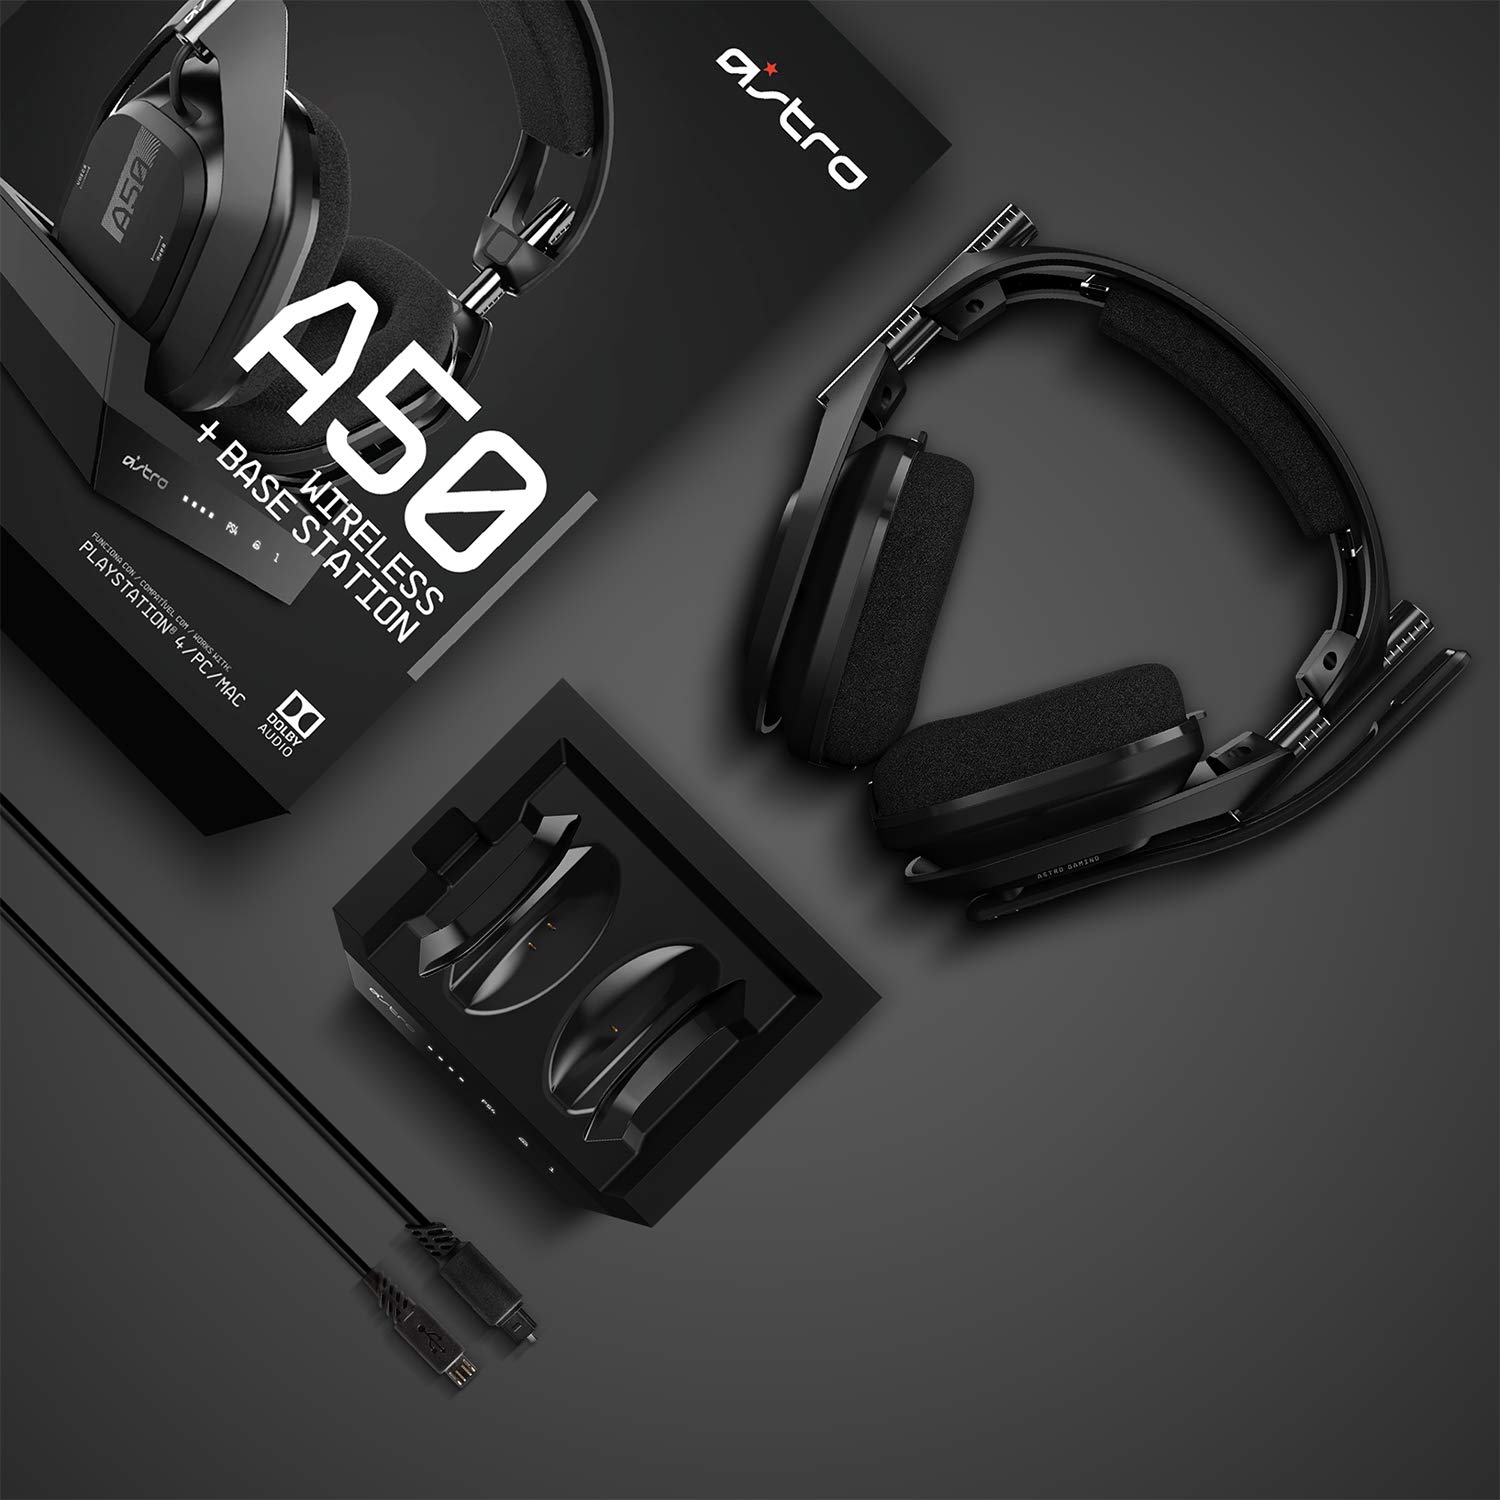 ASTRO Gaming A50 Wireless Headset + Base Station Gen 4 - Compatible With PS5, PS4, PC, Mac - Black/Silver